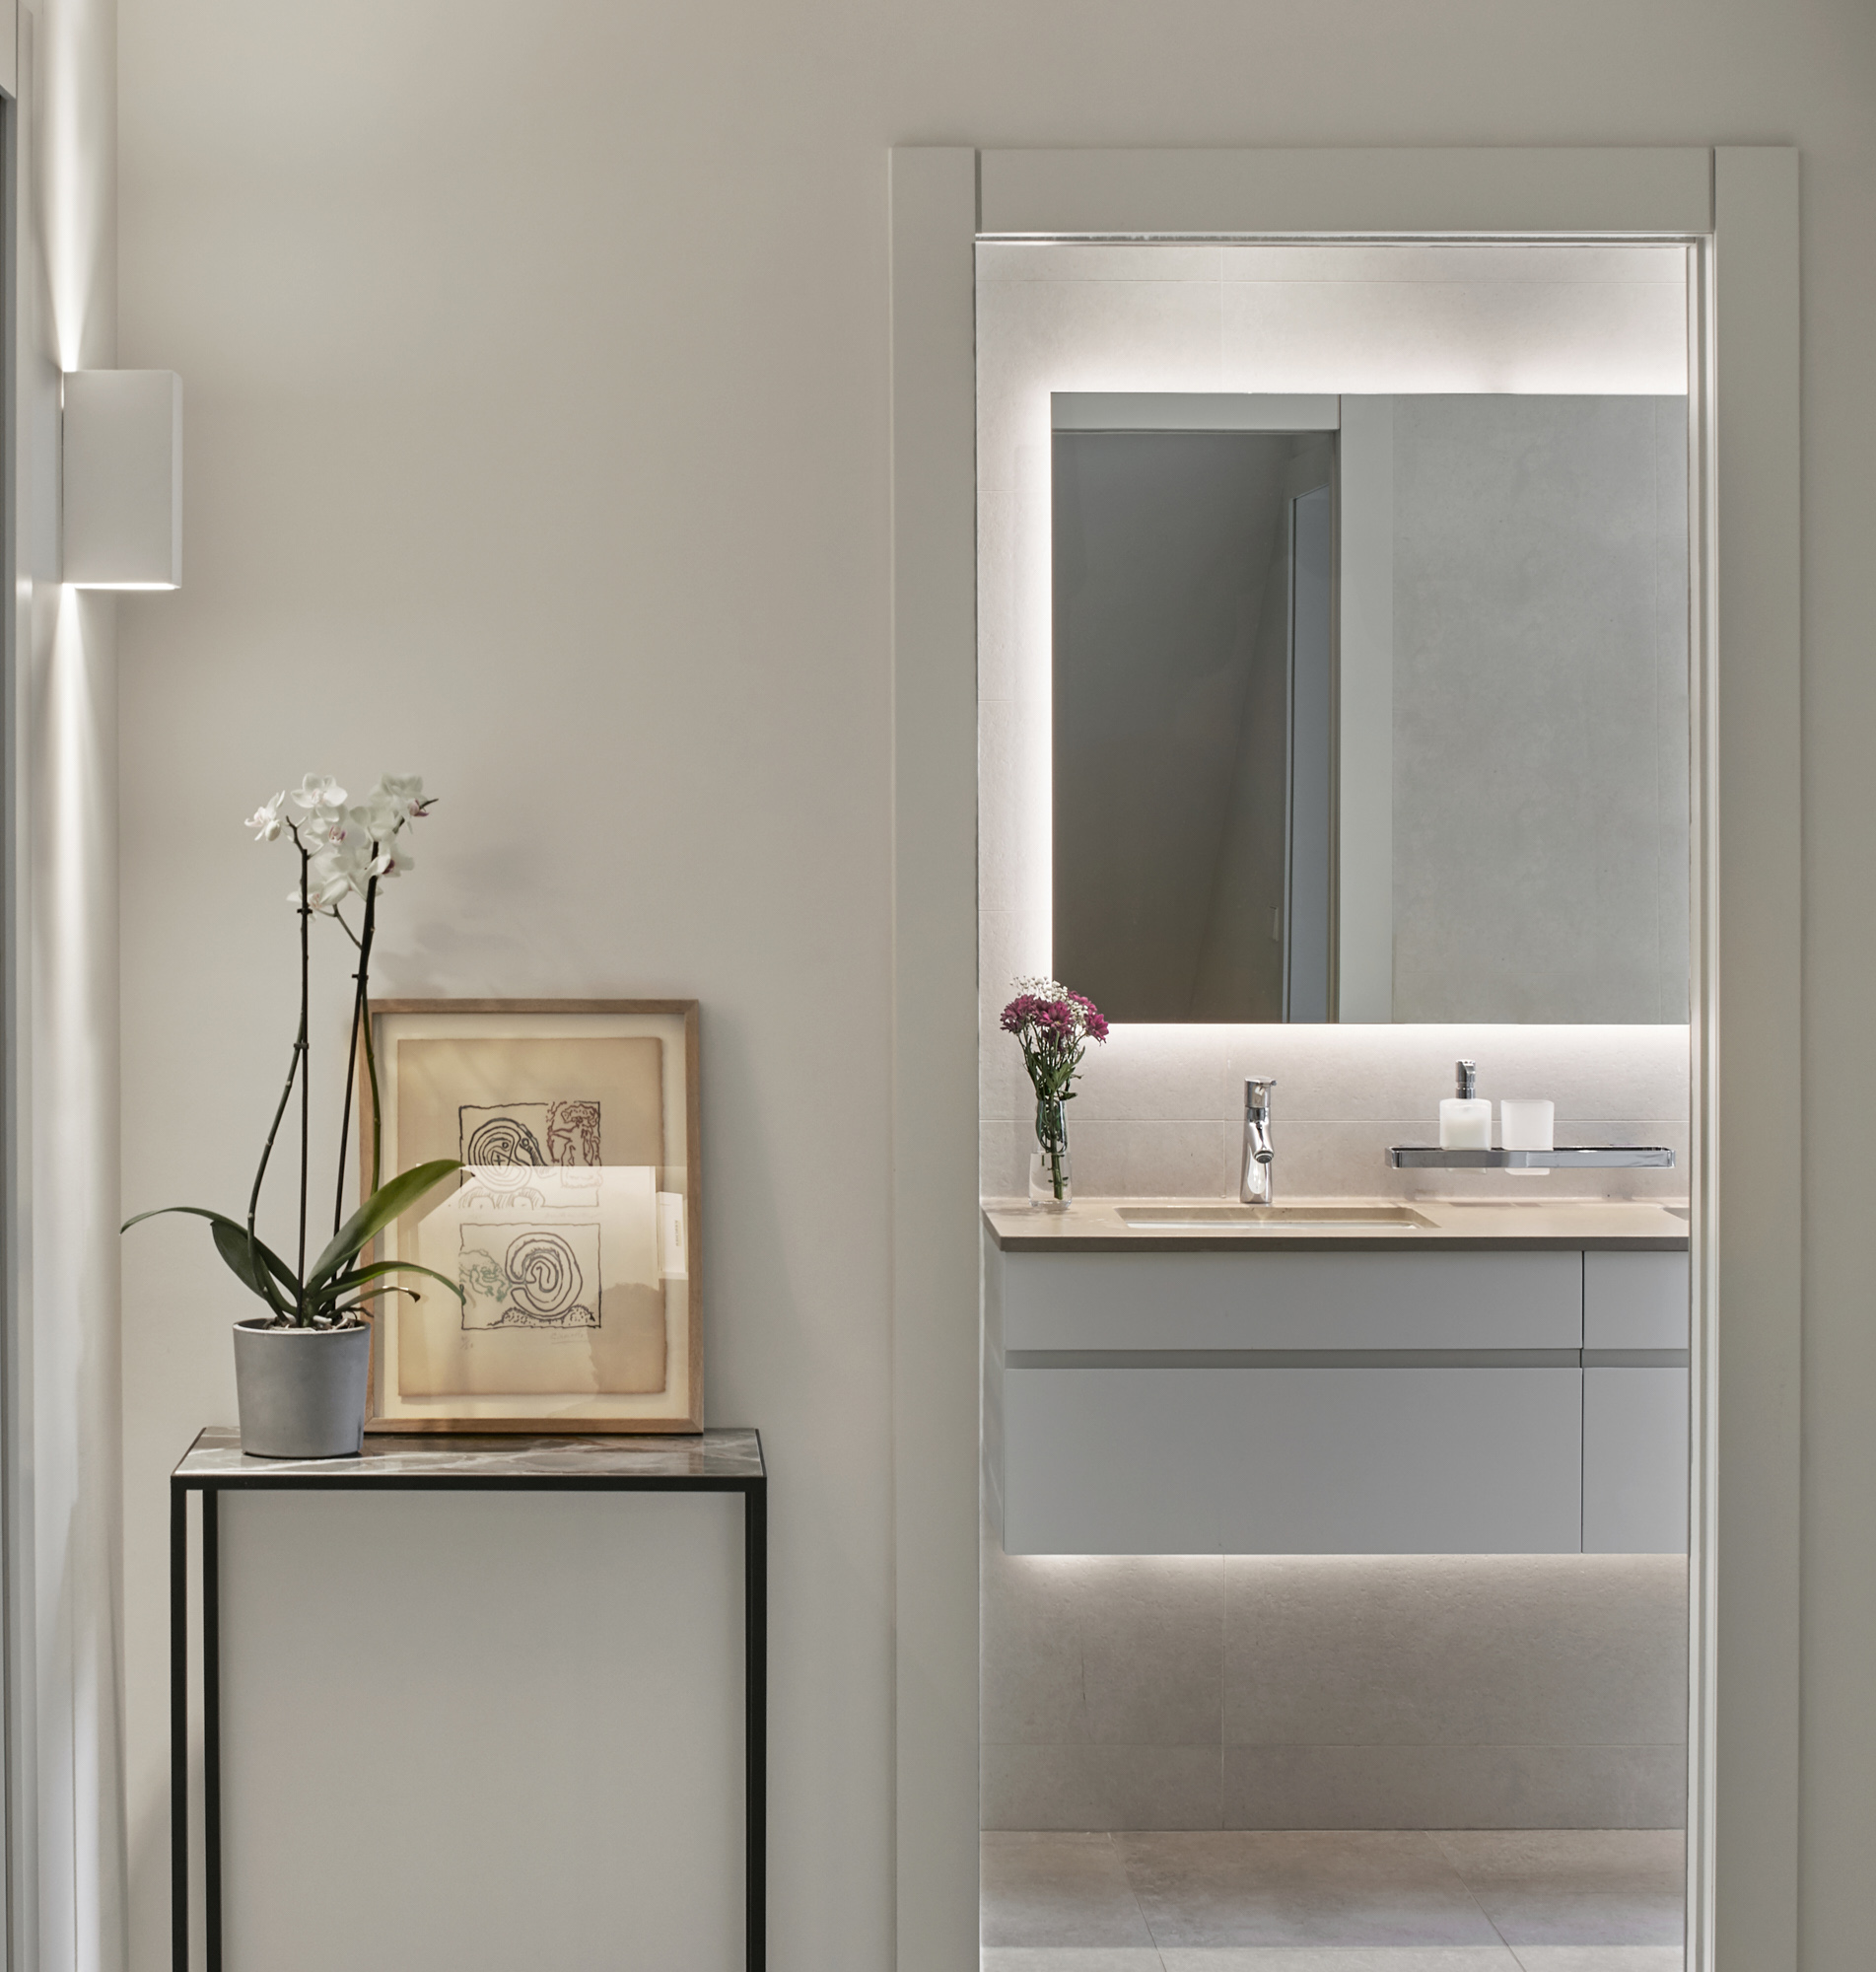 side table and view into minimalist bathroom through a open door